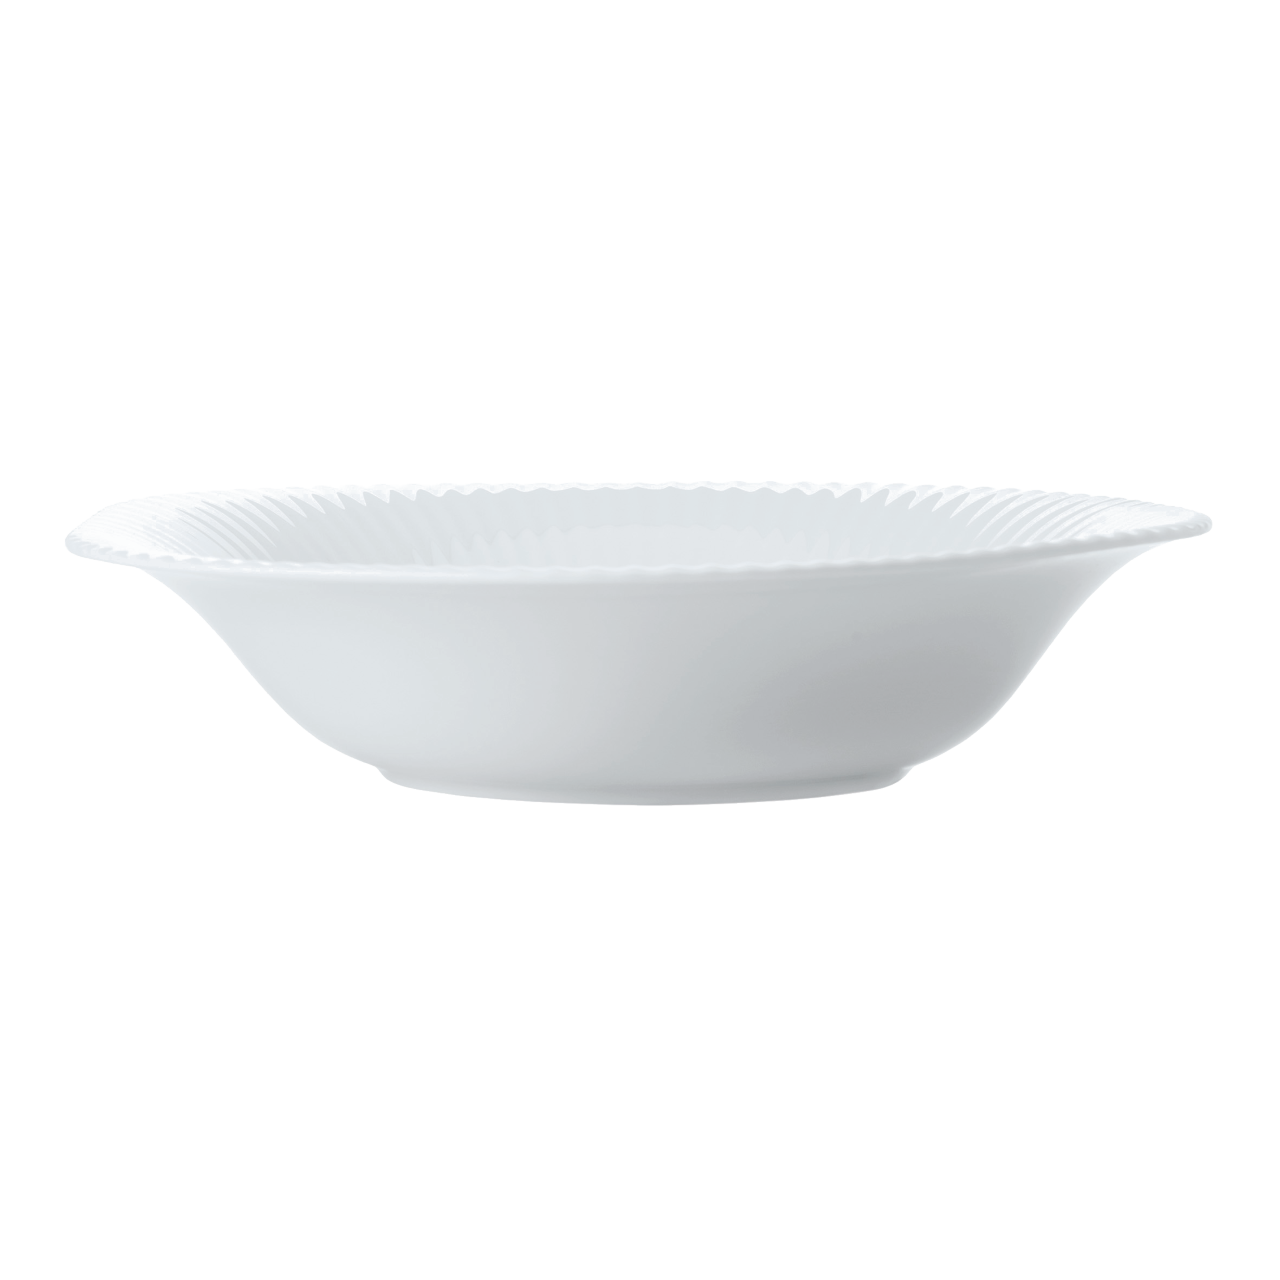 Scallop - Bowl 20.5cm  (4/pack) 50% OFF